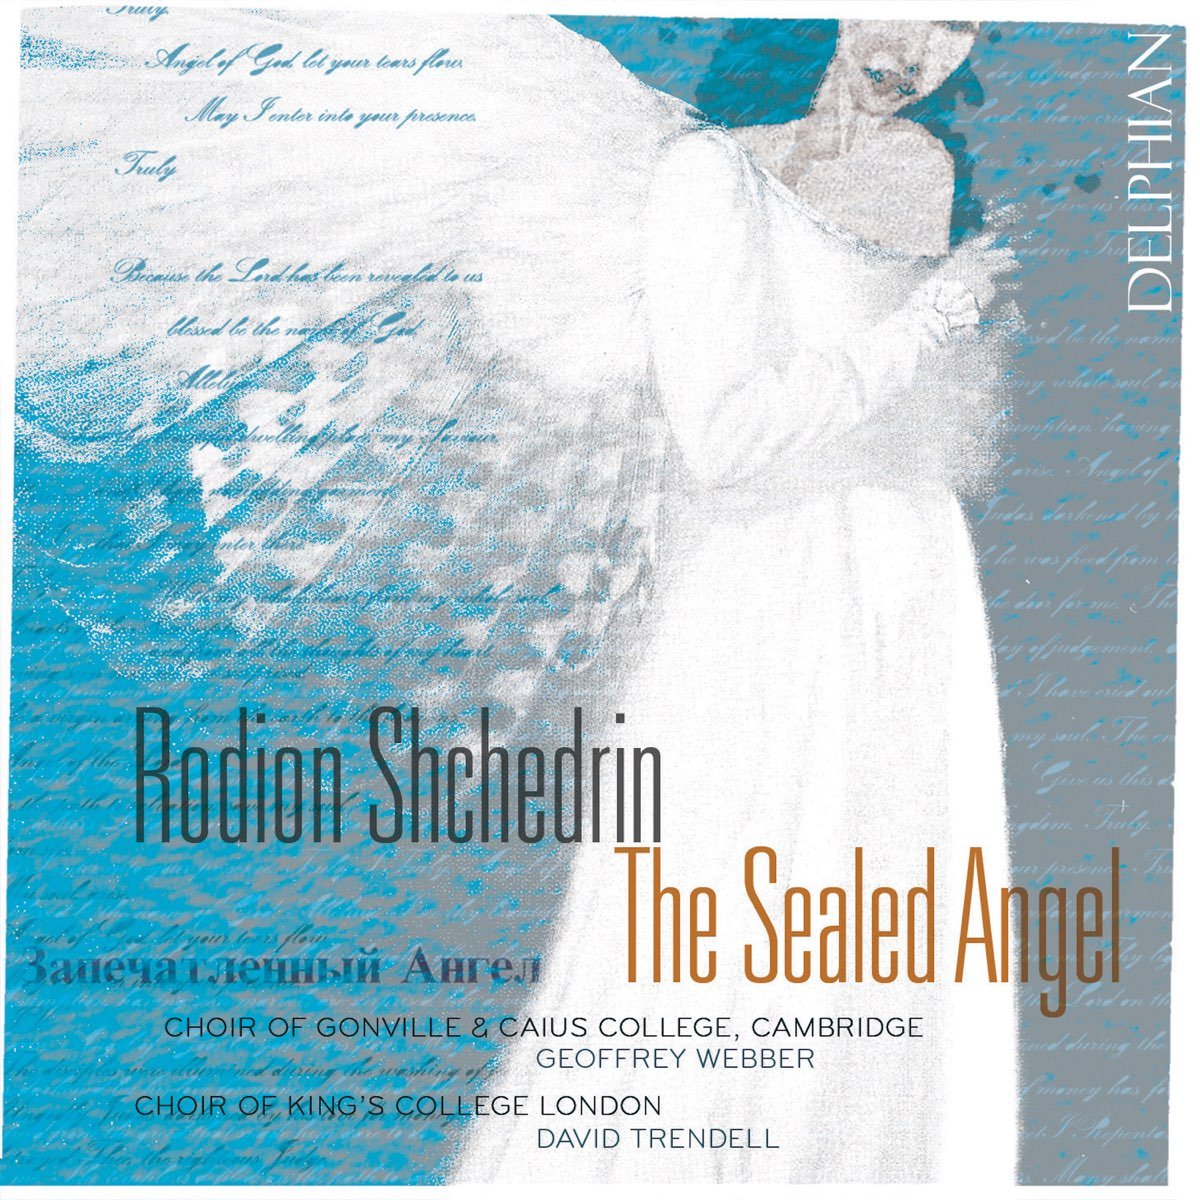 King's London - Shchedrin: The Sealed Angel (2009)